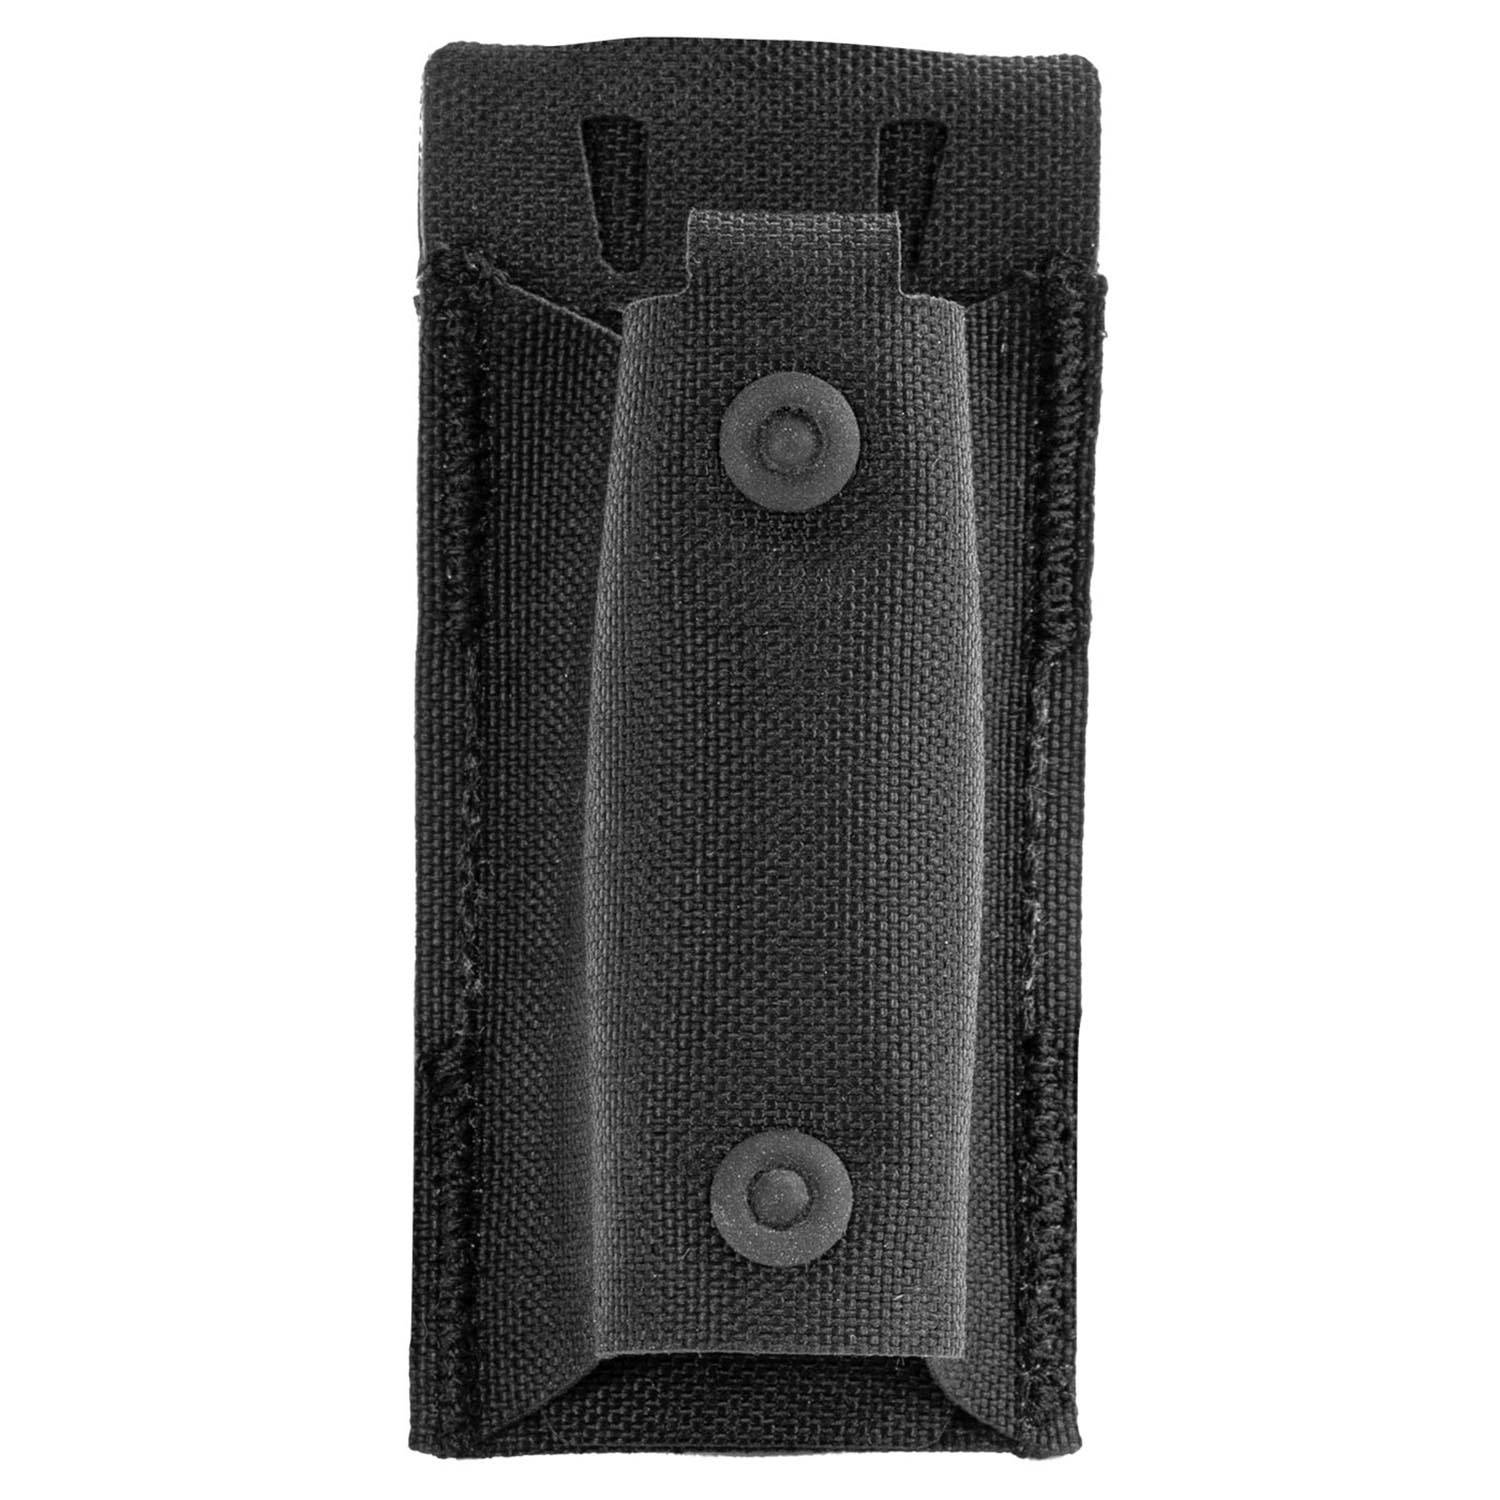 POINT BLANK SMALL FLASHLIGHT POUCH, 3.25"